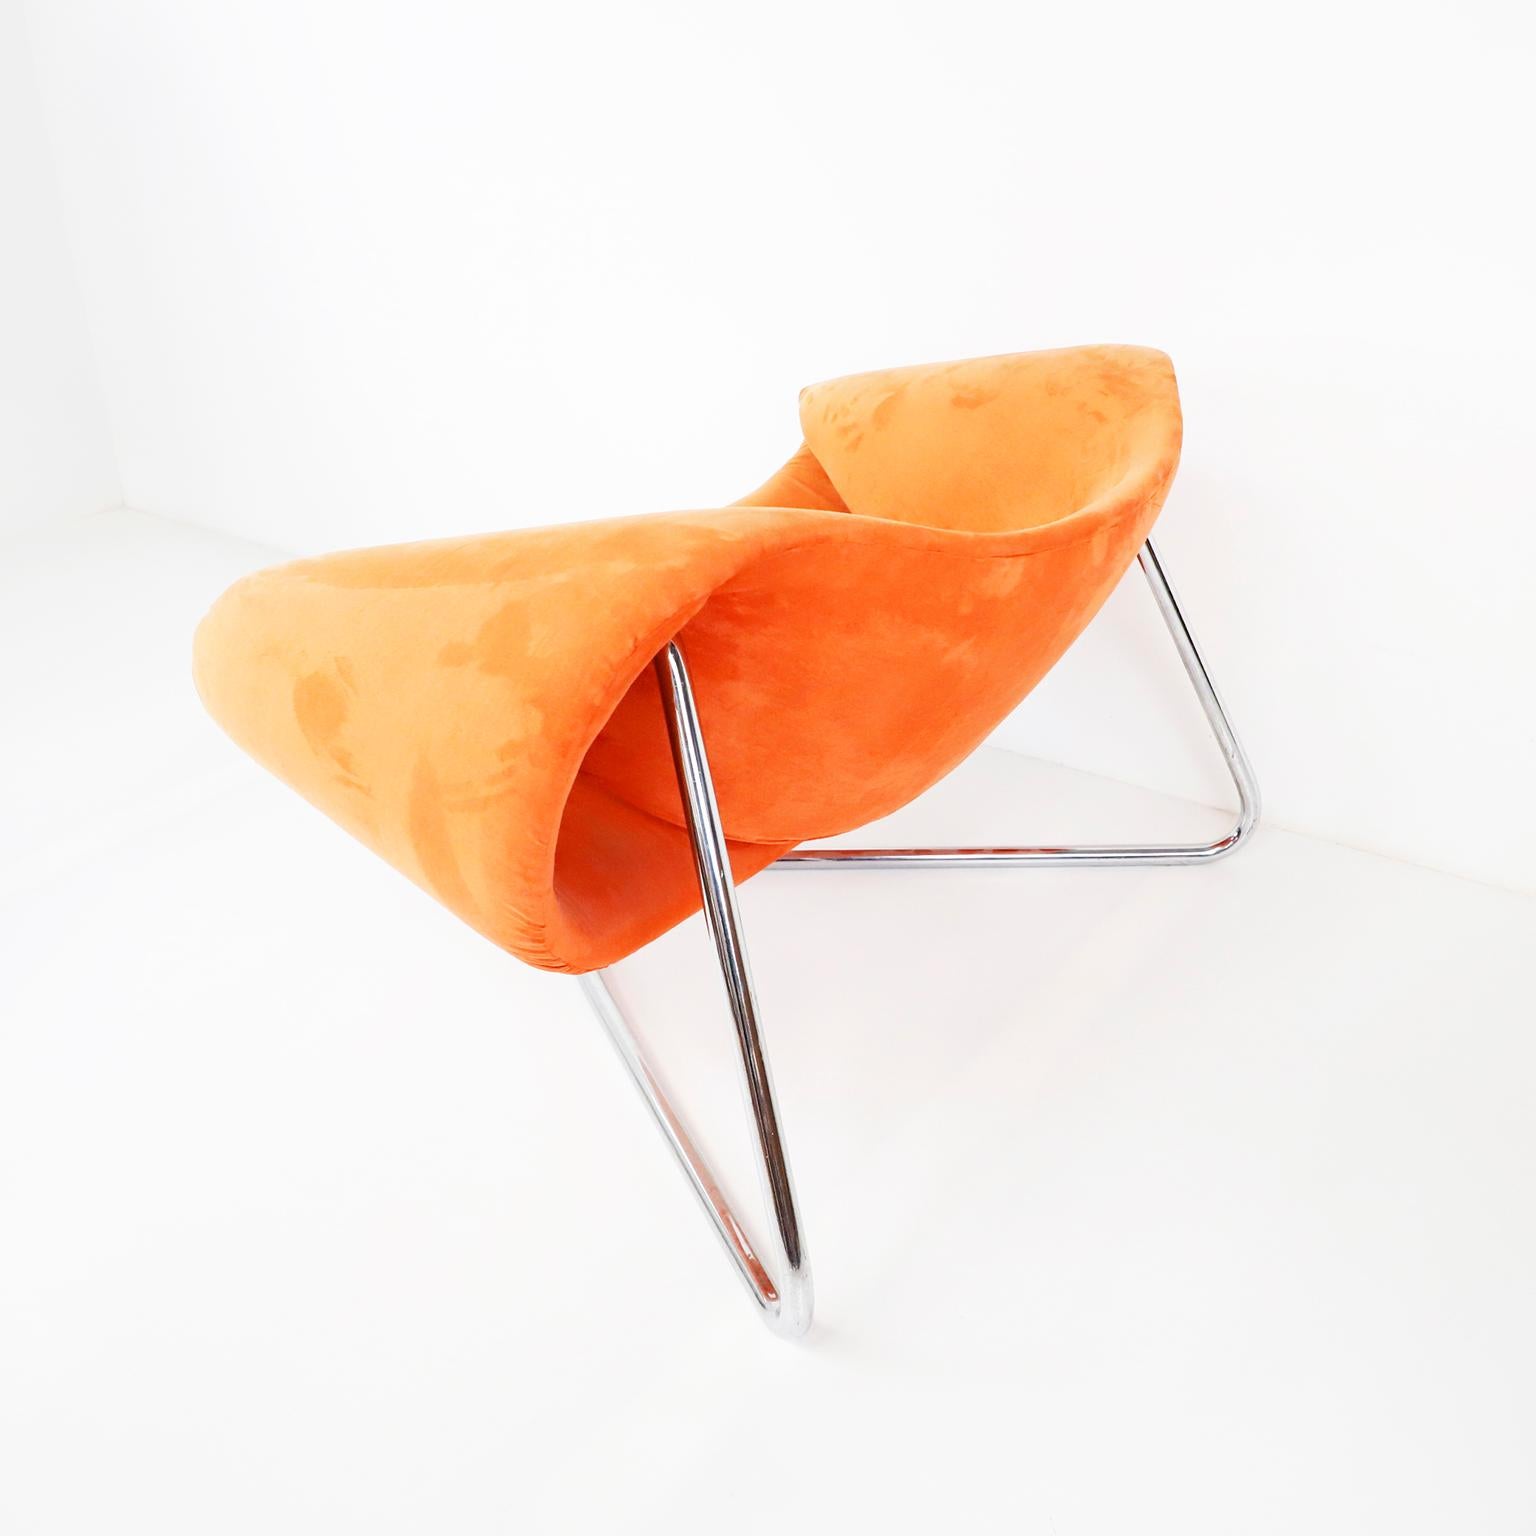 circa 1970, We offer this Pair of Ribbon Chairs attributed to Cesare Leonardi & Franca Stagi.